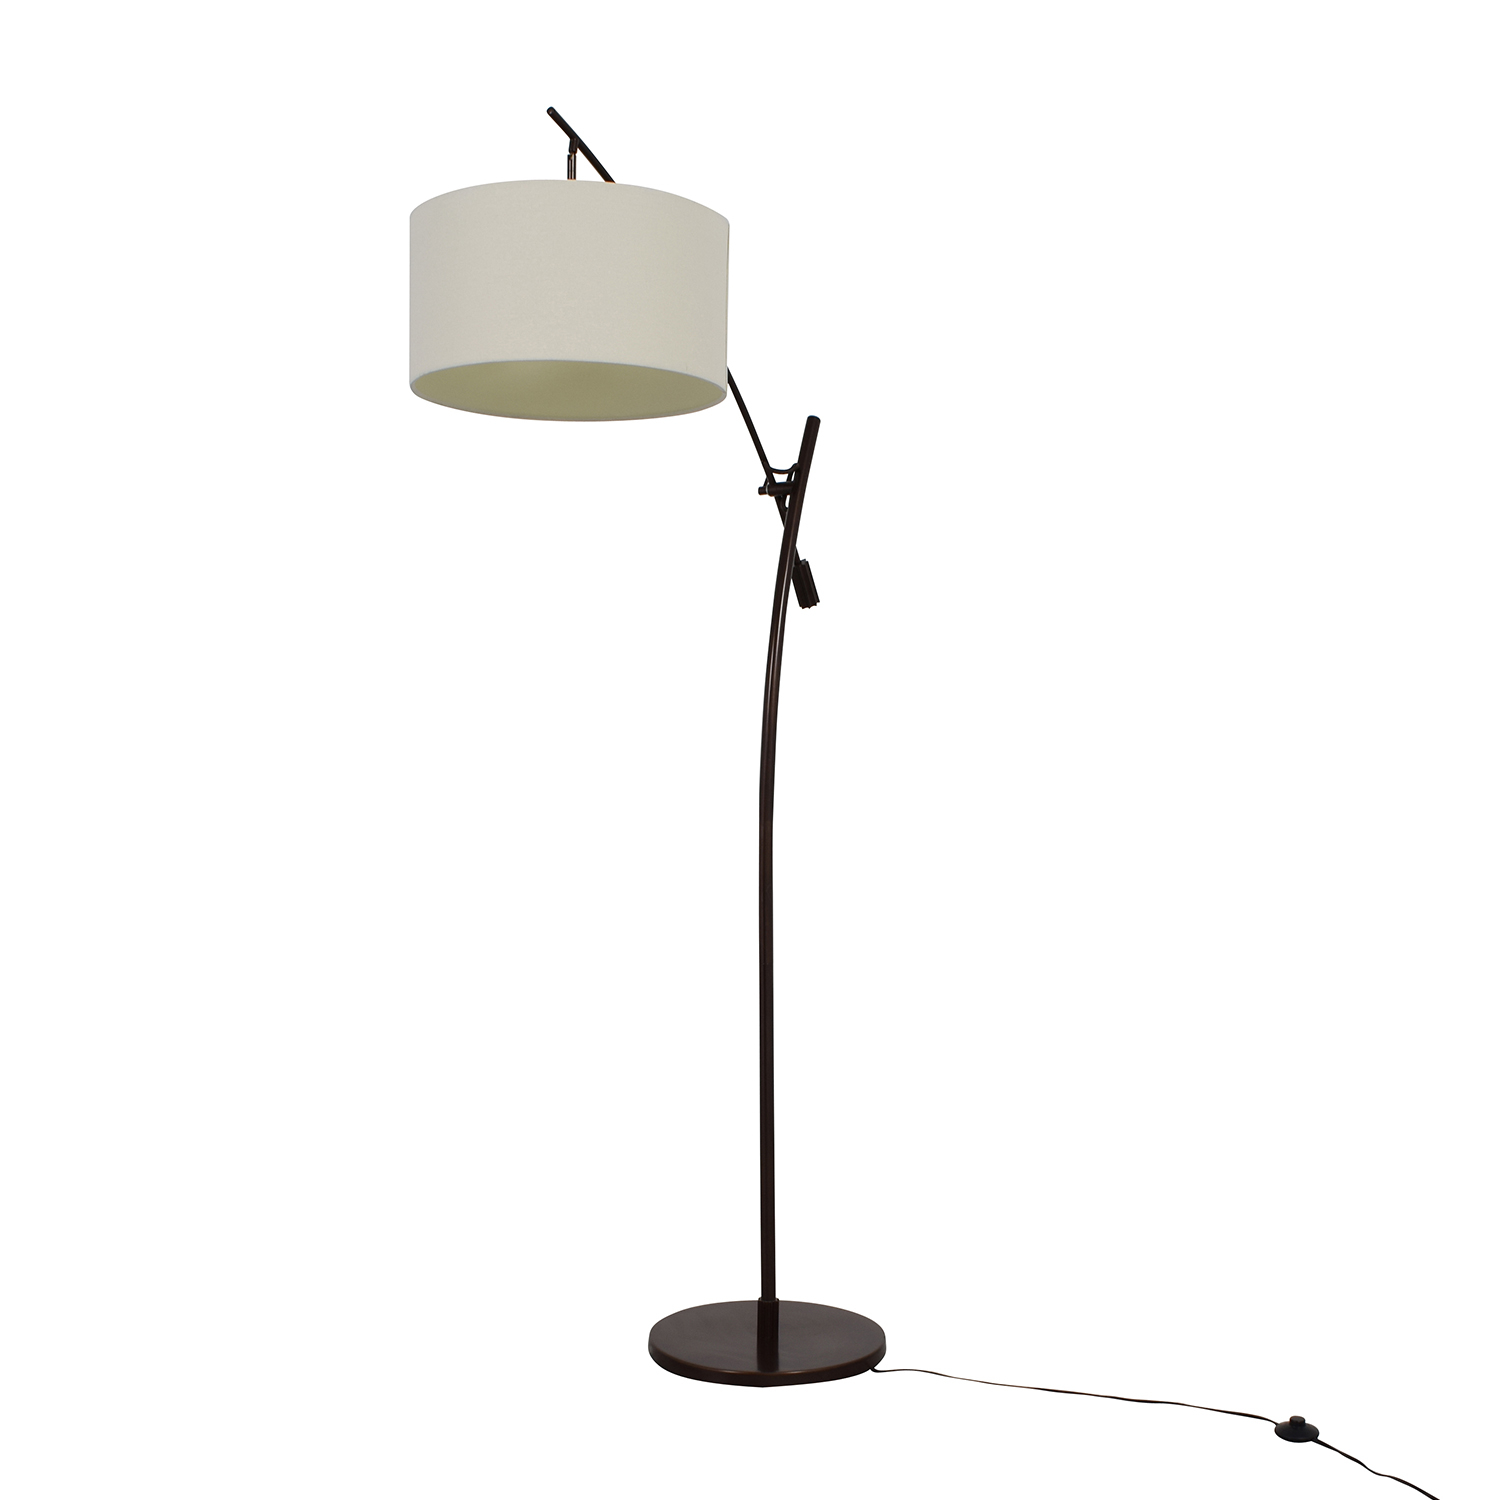 39 Off Levar Bronze Boom Arc Floor Lamp With Linen Shade Decor pertaining to sizing 1500 X 1500